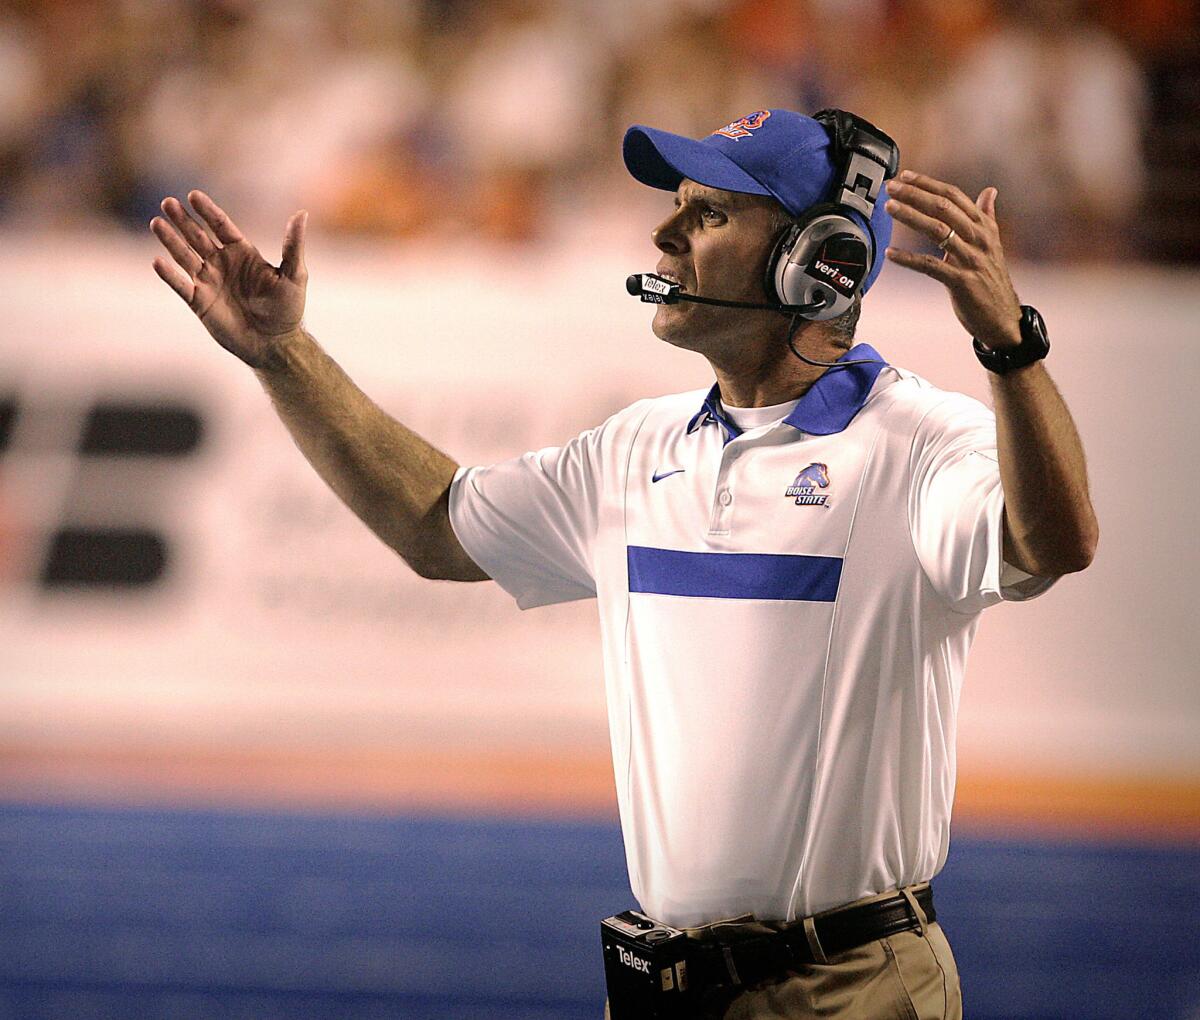 Boise State will get its first opportunity to face former coach Chris Petersen, seen here during a 2011 game against Tulsa, when the Broncos play Washington in the season opener.